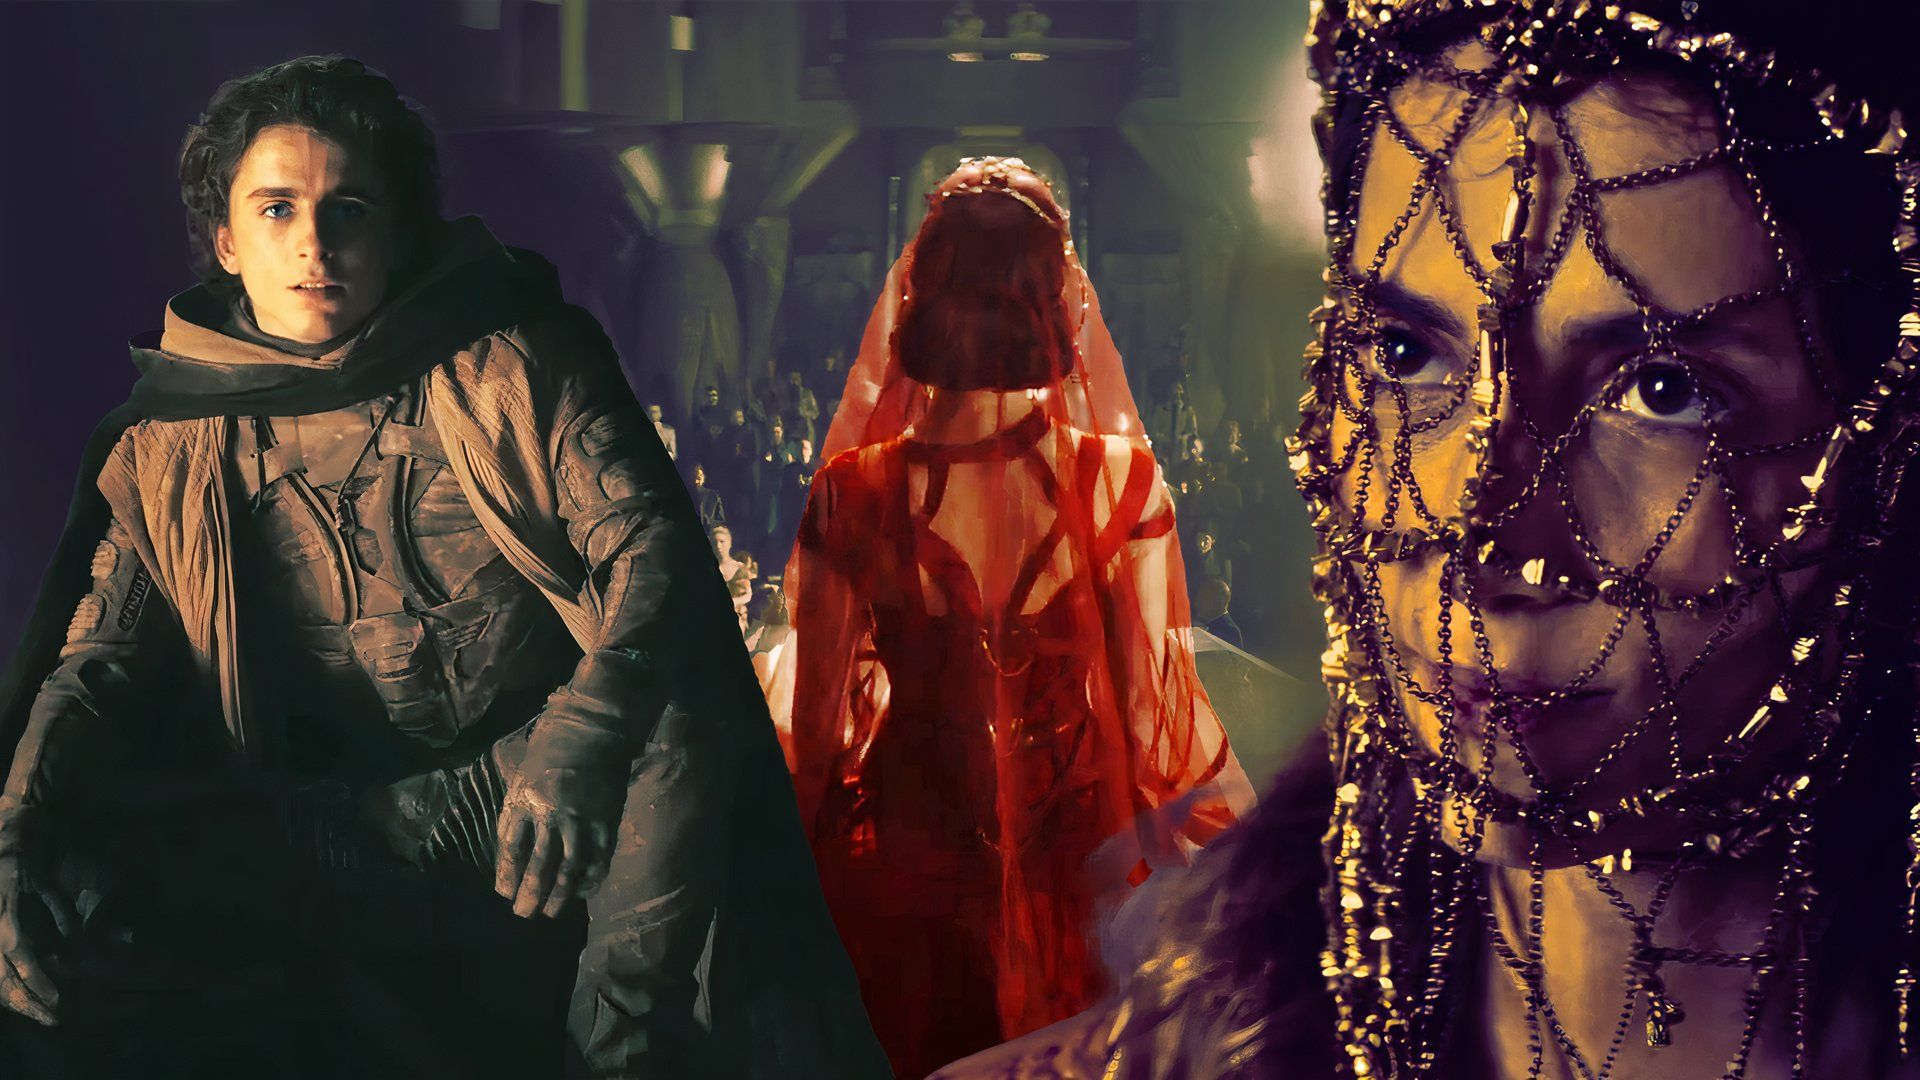 Tabu with jewelry covering her face alongside Timothee Chalamet as Paul Atreides in Dune: Part Two